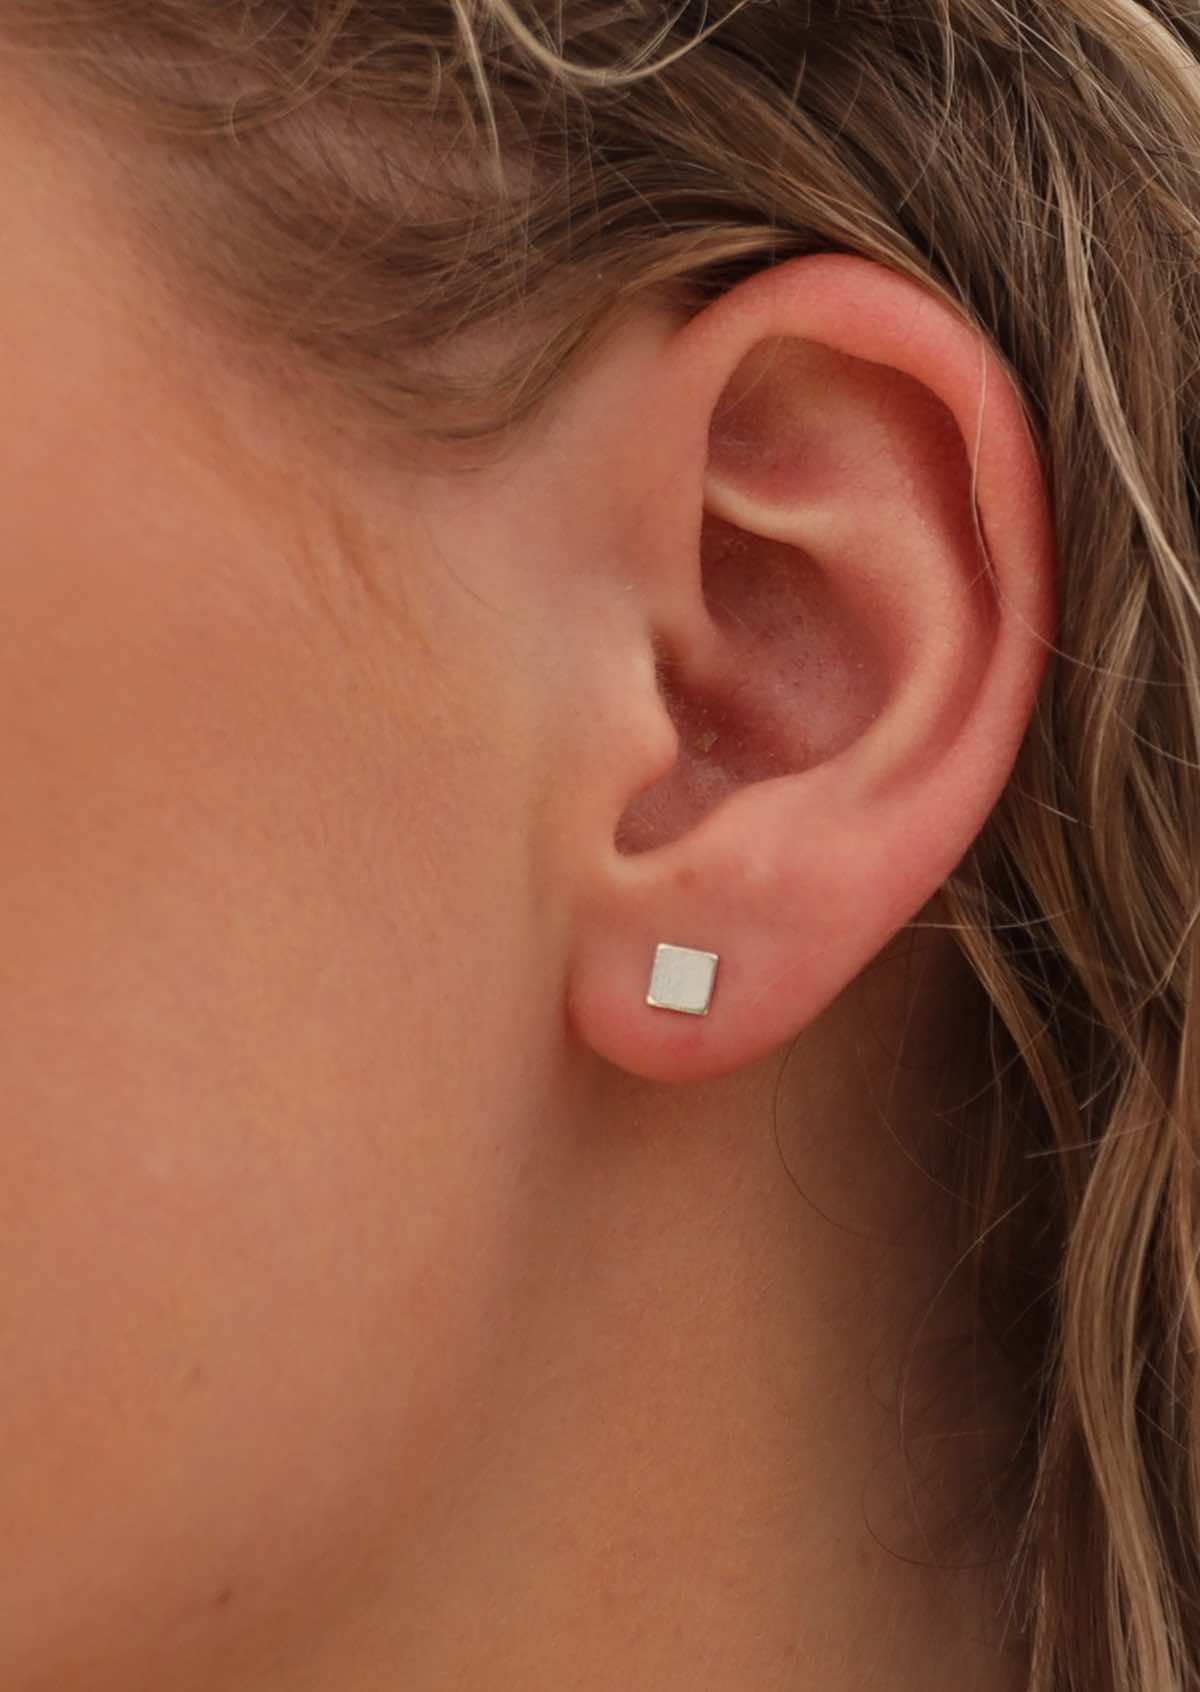 woman's ear with square silver stud earrings